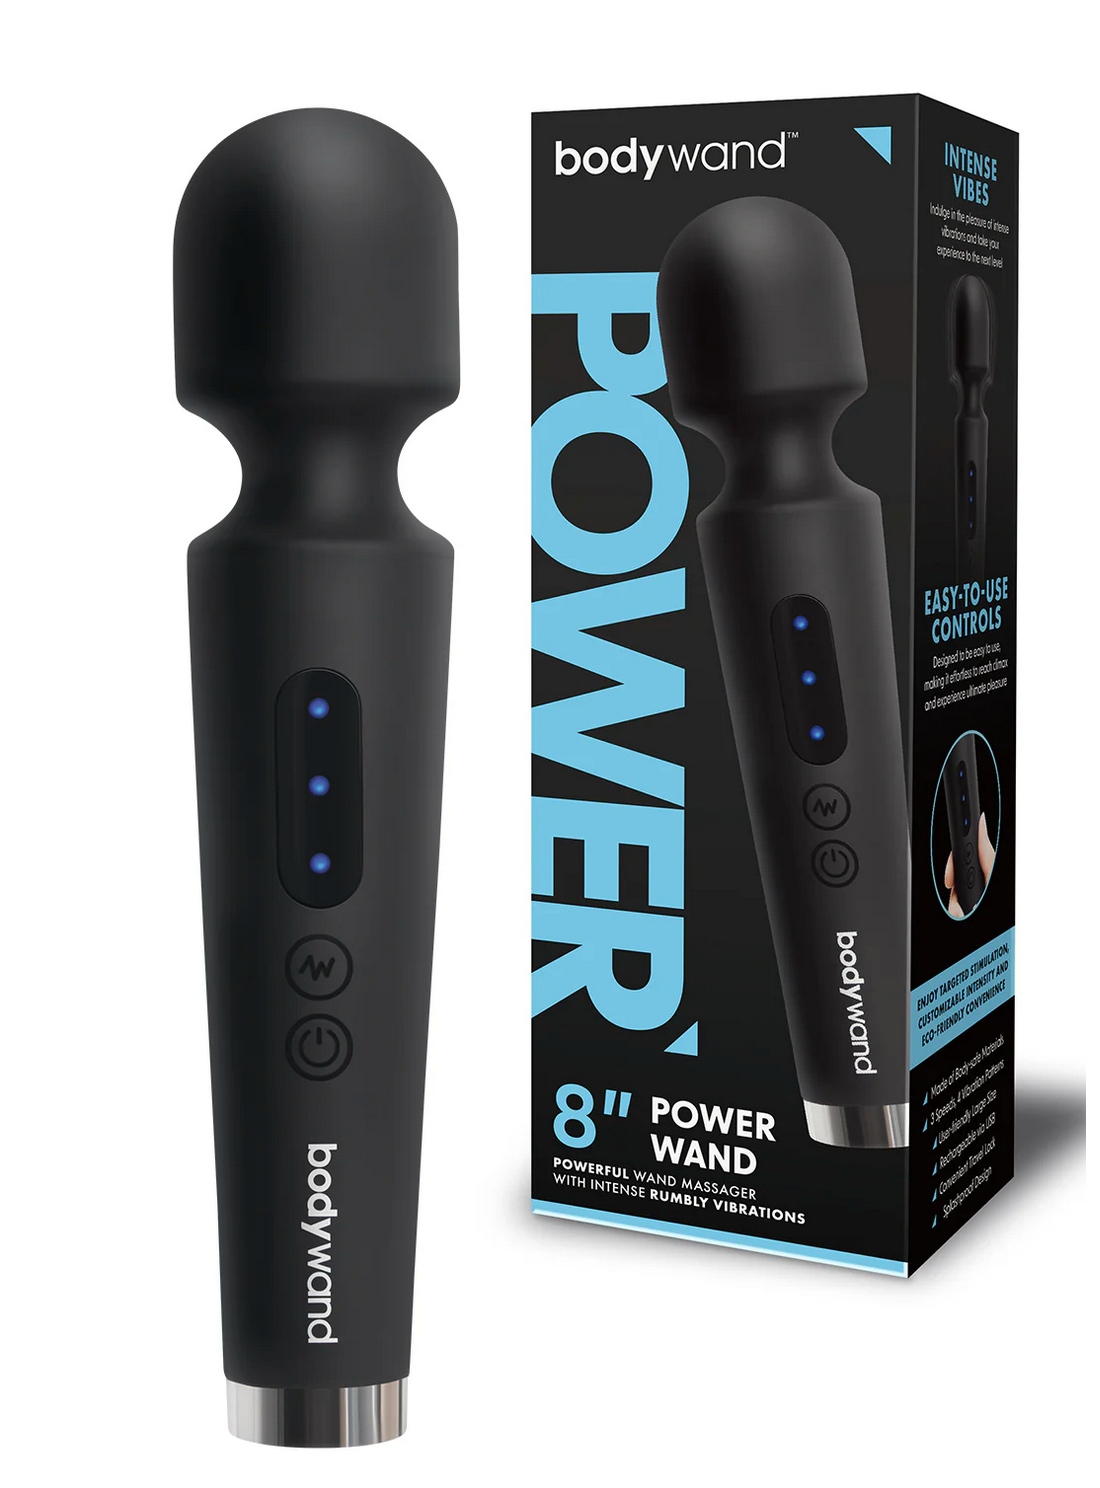 8" Power Wand From Bodywand in Black